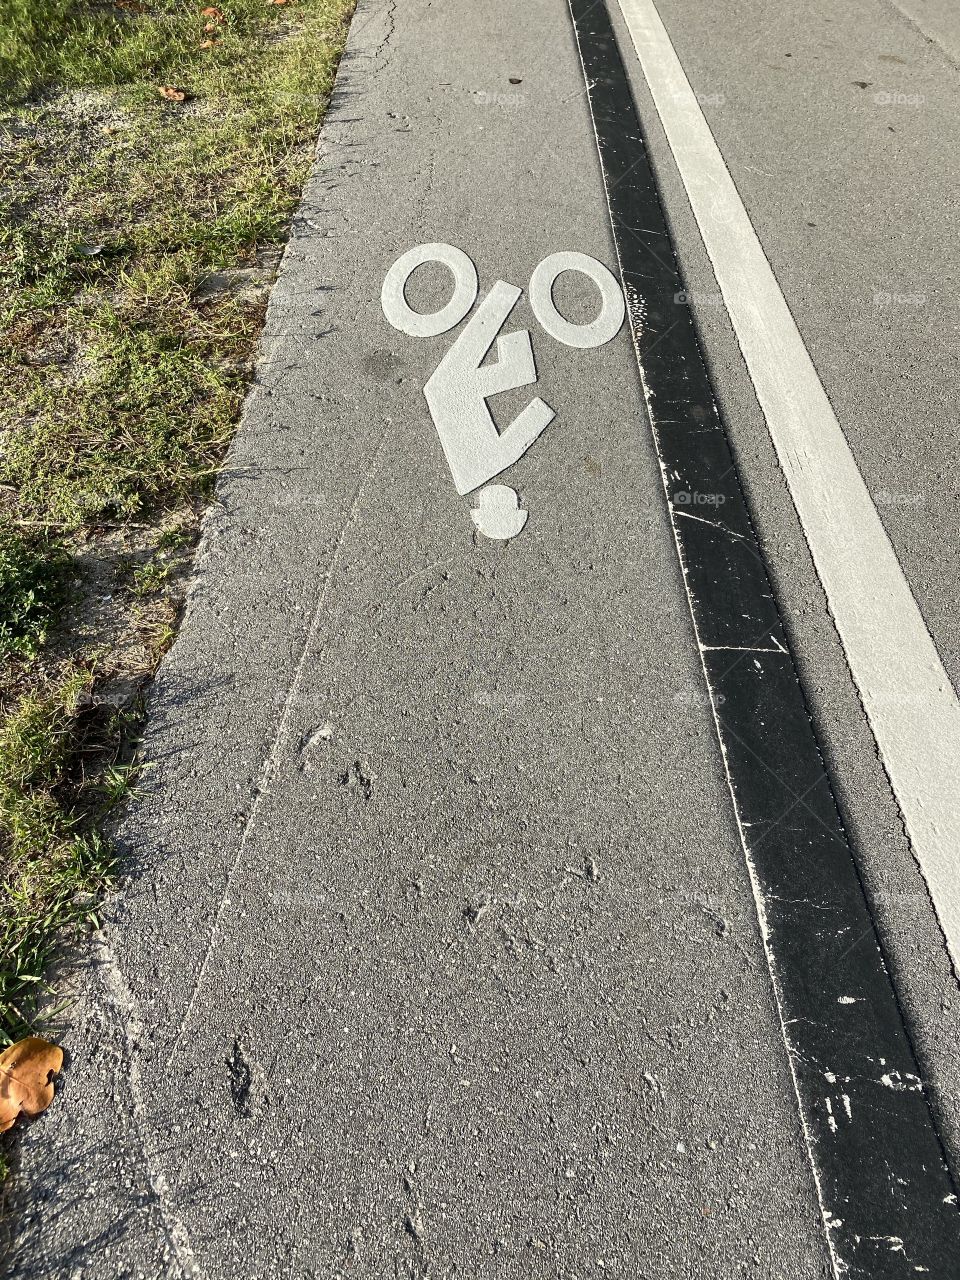 BIKE LANE ON THE SIDE OF THE ROAD 🚲